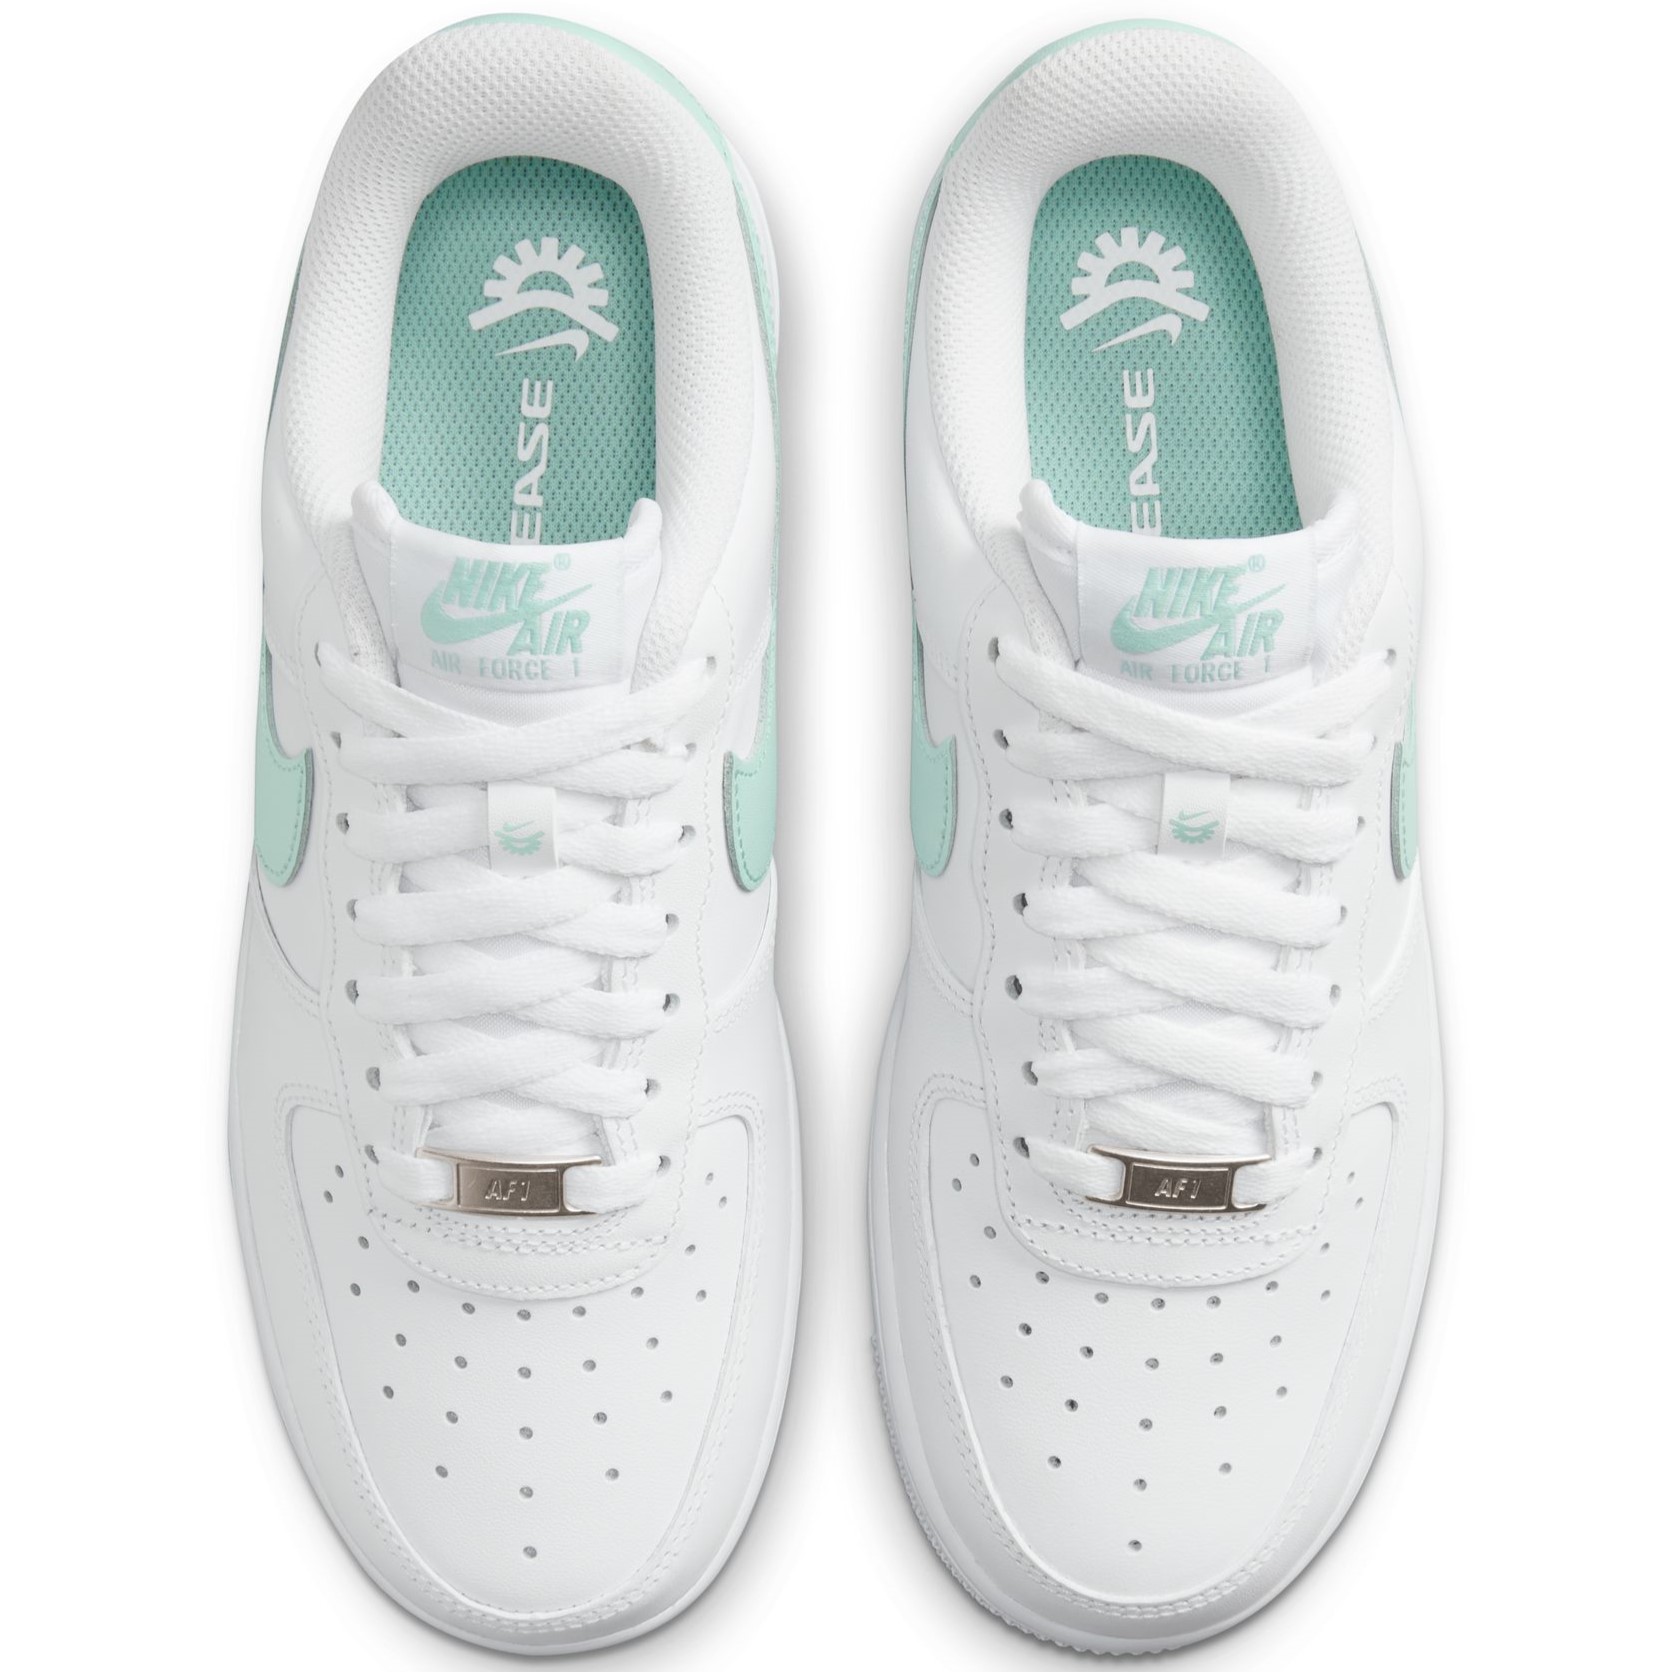 GIÀY THỂ THAO NIKE NỮ AIR FORCE 1 07 EASYON WHITE ICE JADE WOMENS SHOES DX5883-101 6